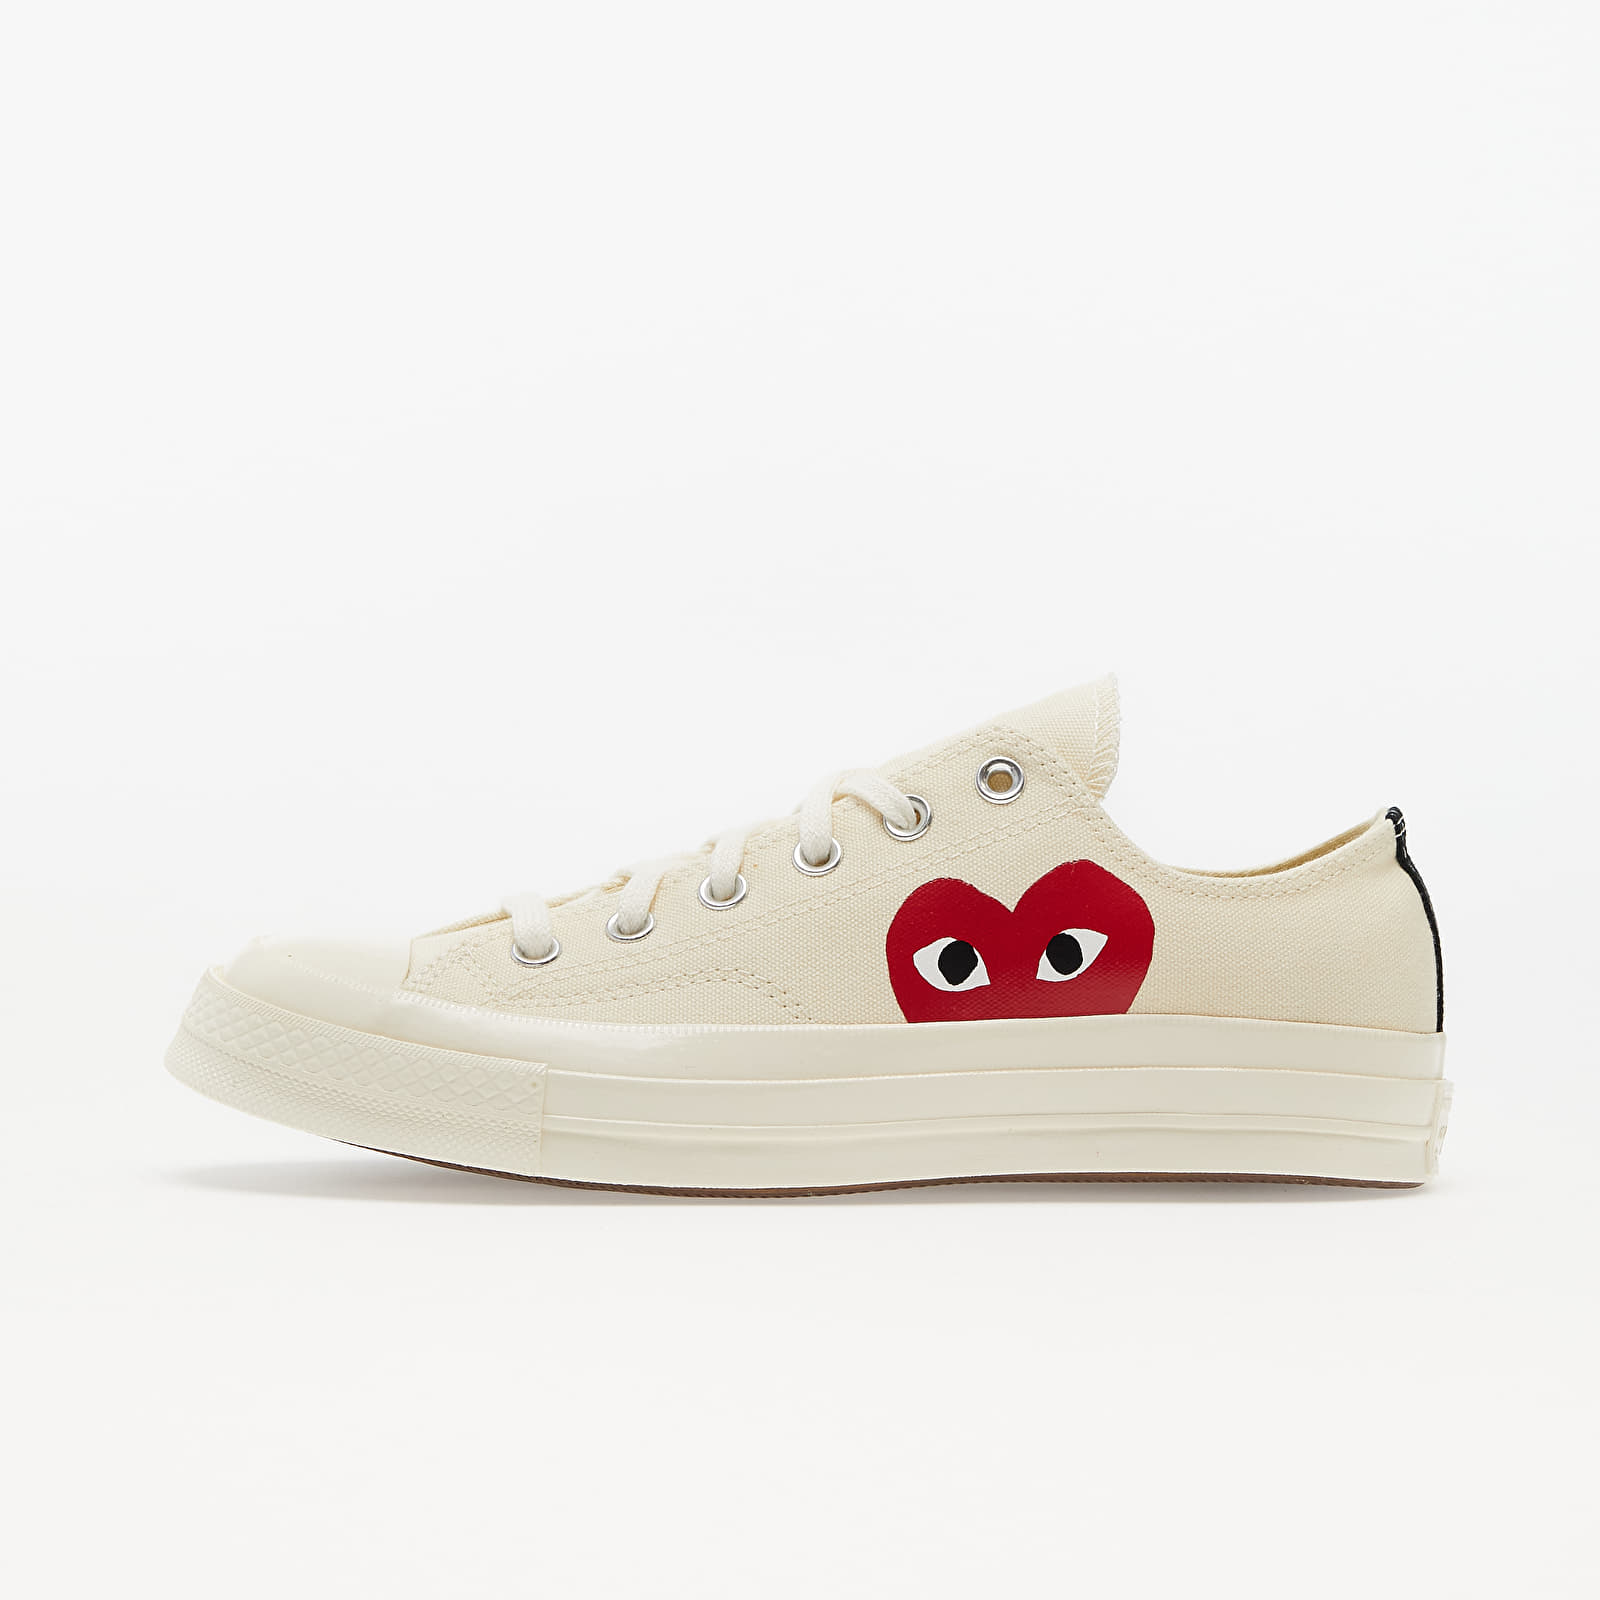 Buty męskie Converse x Comme des Garcons PLAY Chuck 70 Milk/ White/ High Risk Red